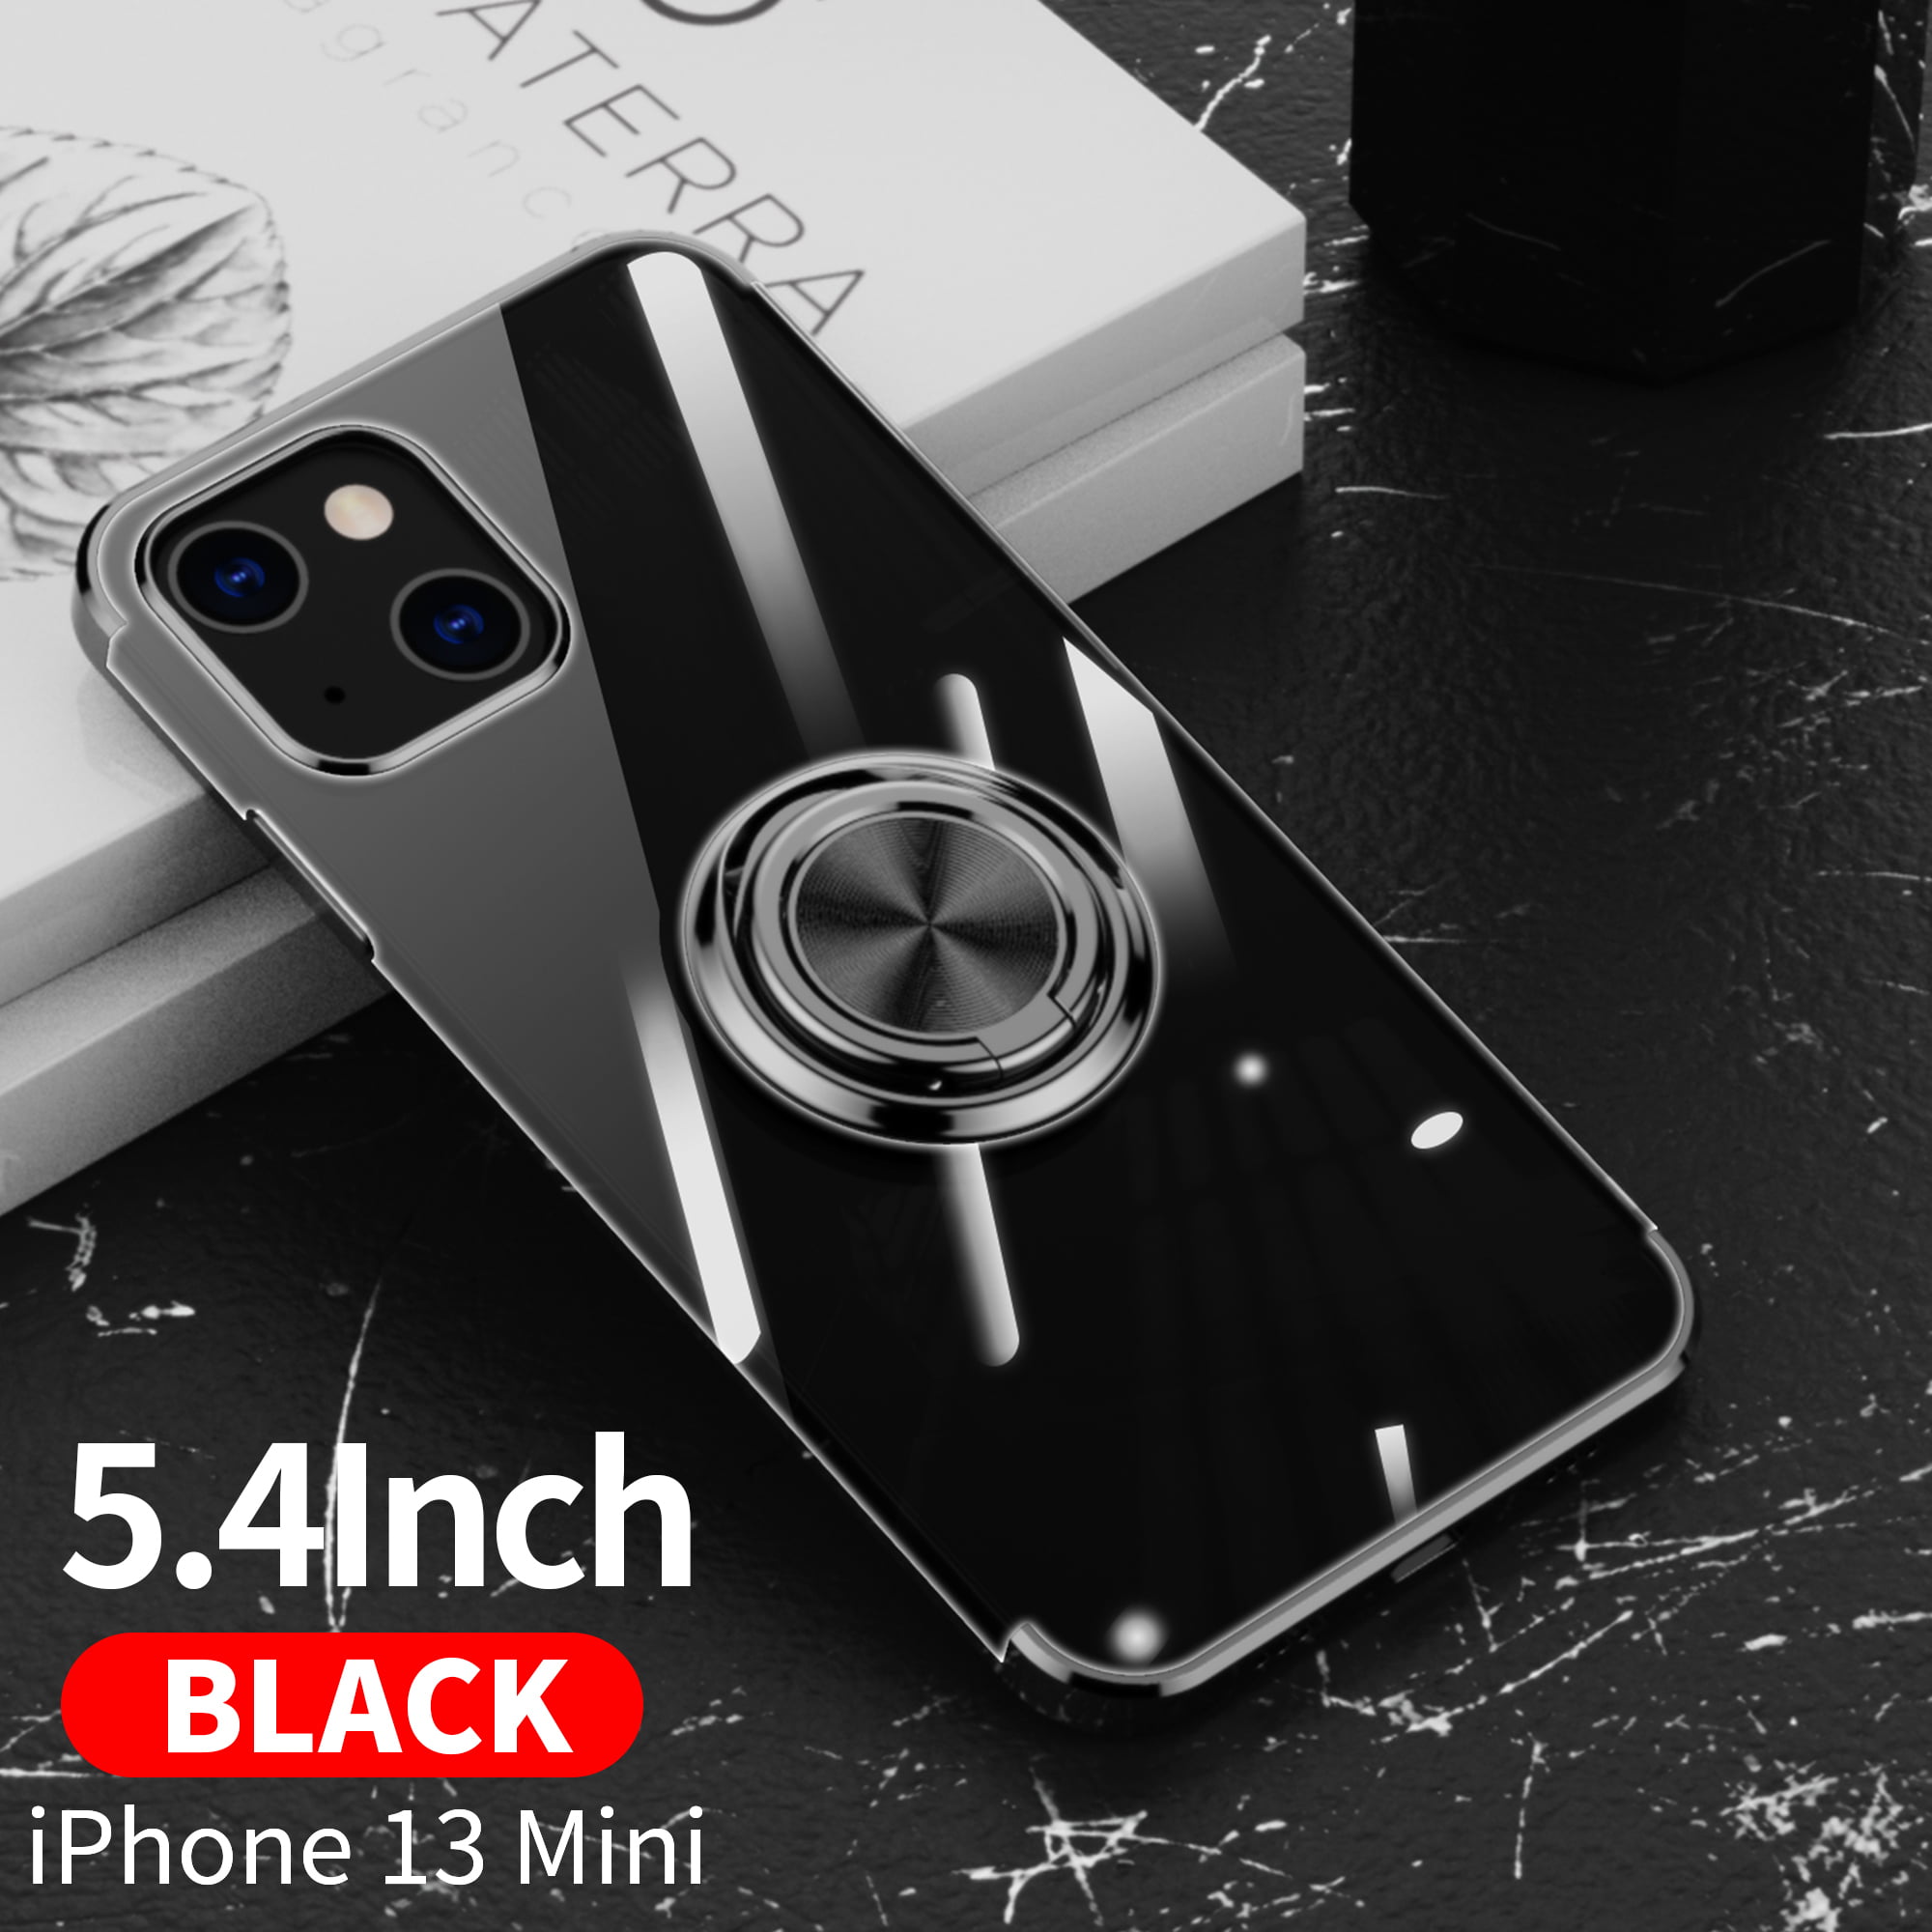 XTCASE Case with Mobile Phone Chain for Samsung Galaxy A10 Transparent Soft Flexible Silicone TPU Bumper Cover Smartphone Neck Strap Stylish and Super Practical Adjustable Length Black